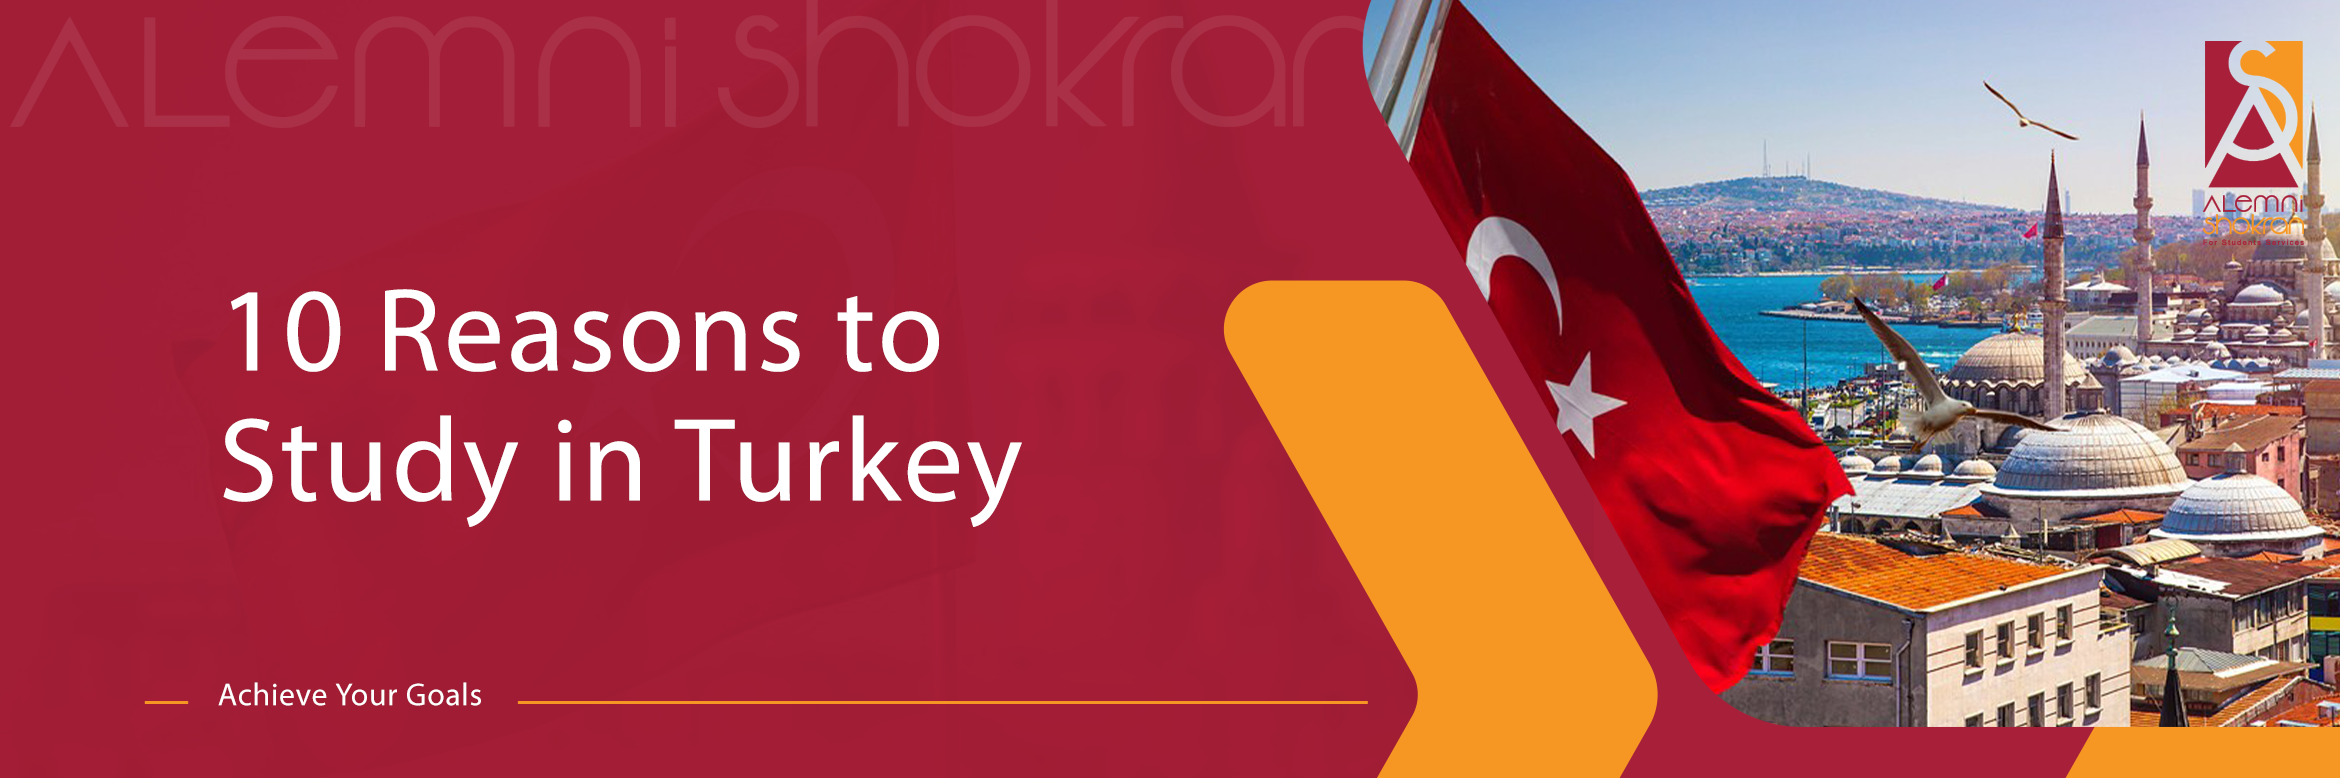 10 Reasons to Study in Turkey